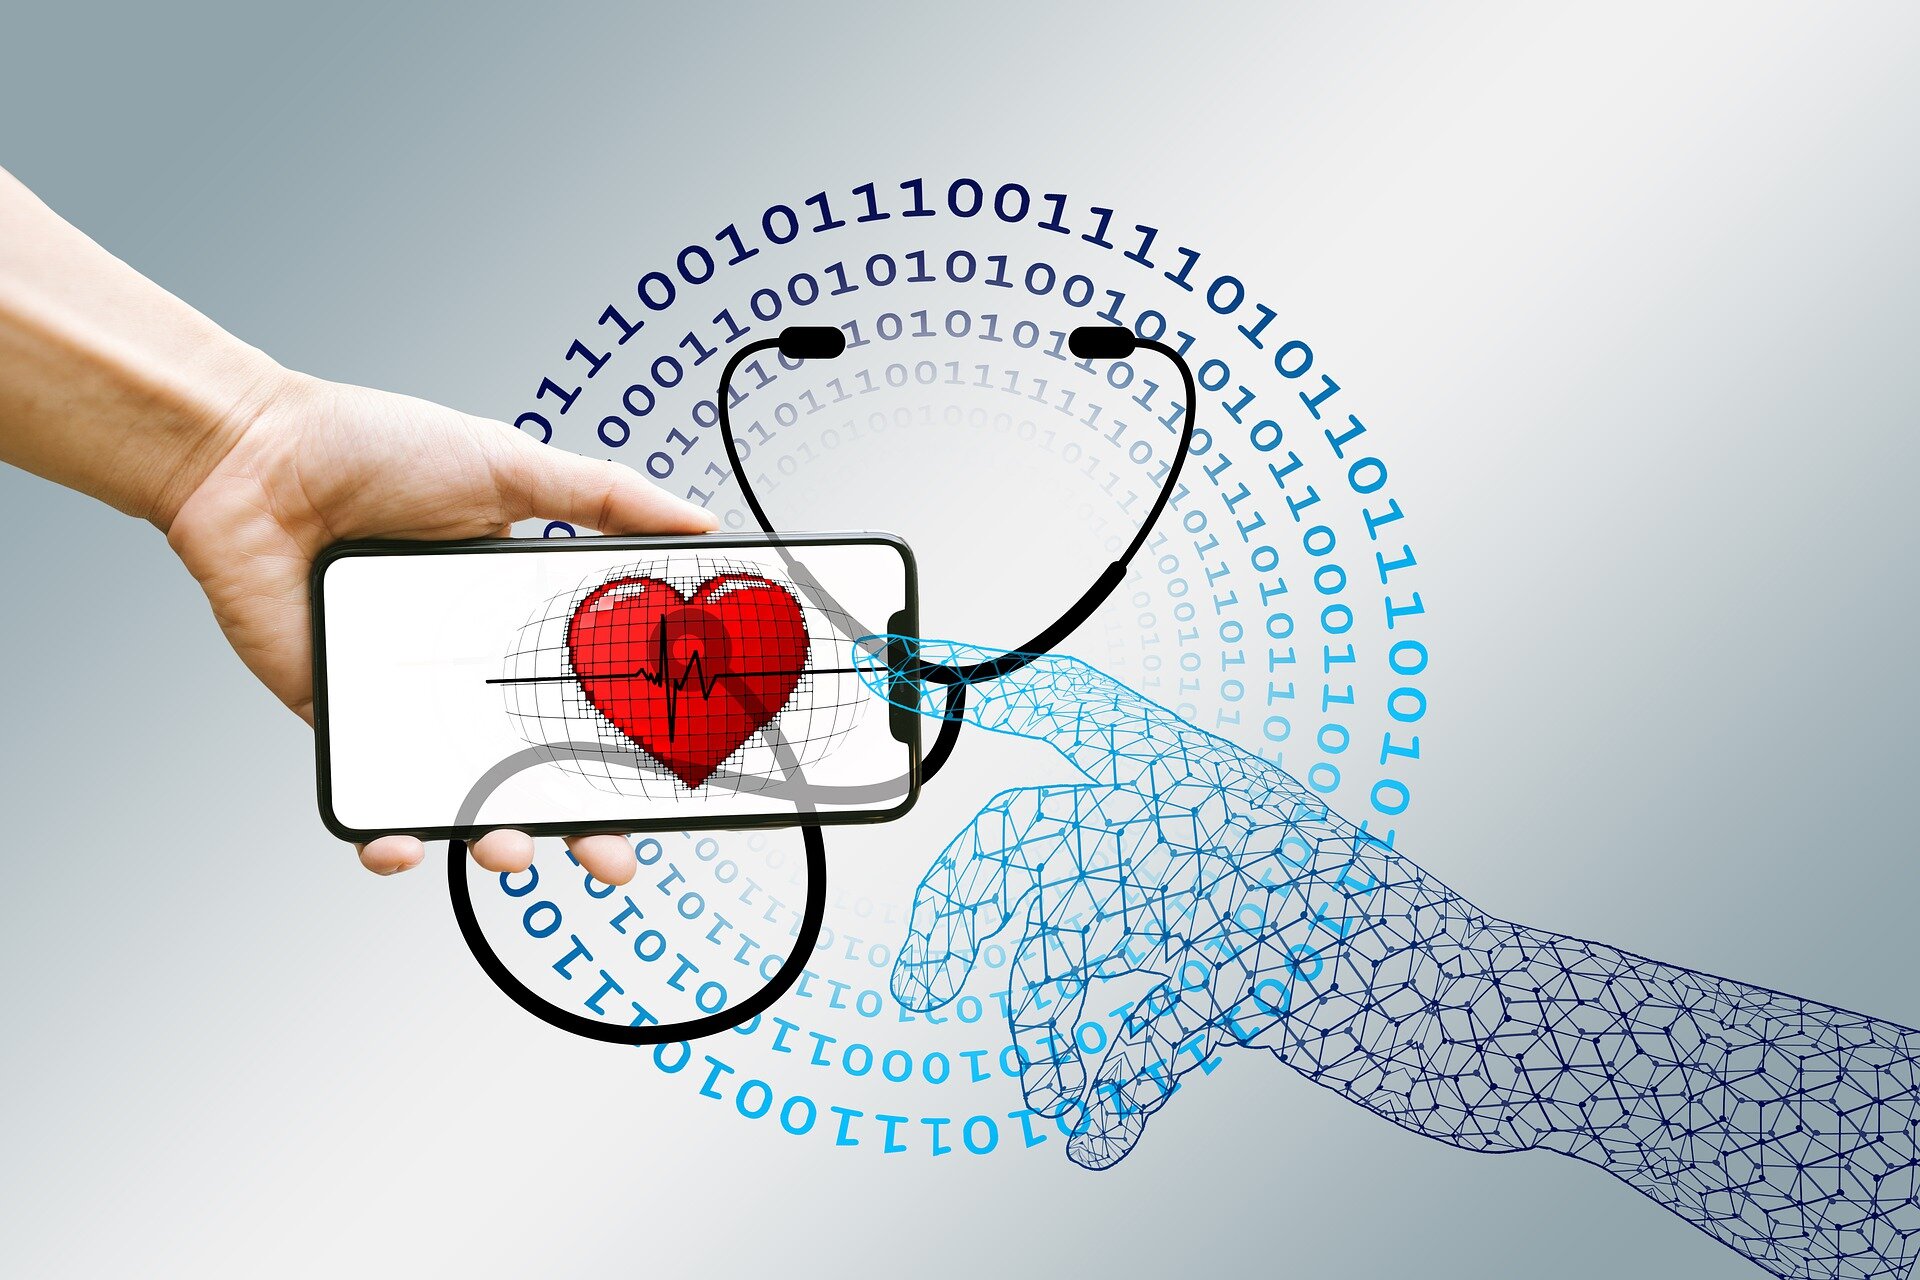 #Is digital health just for the rich?